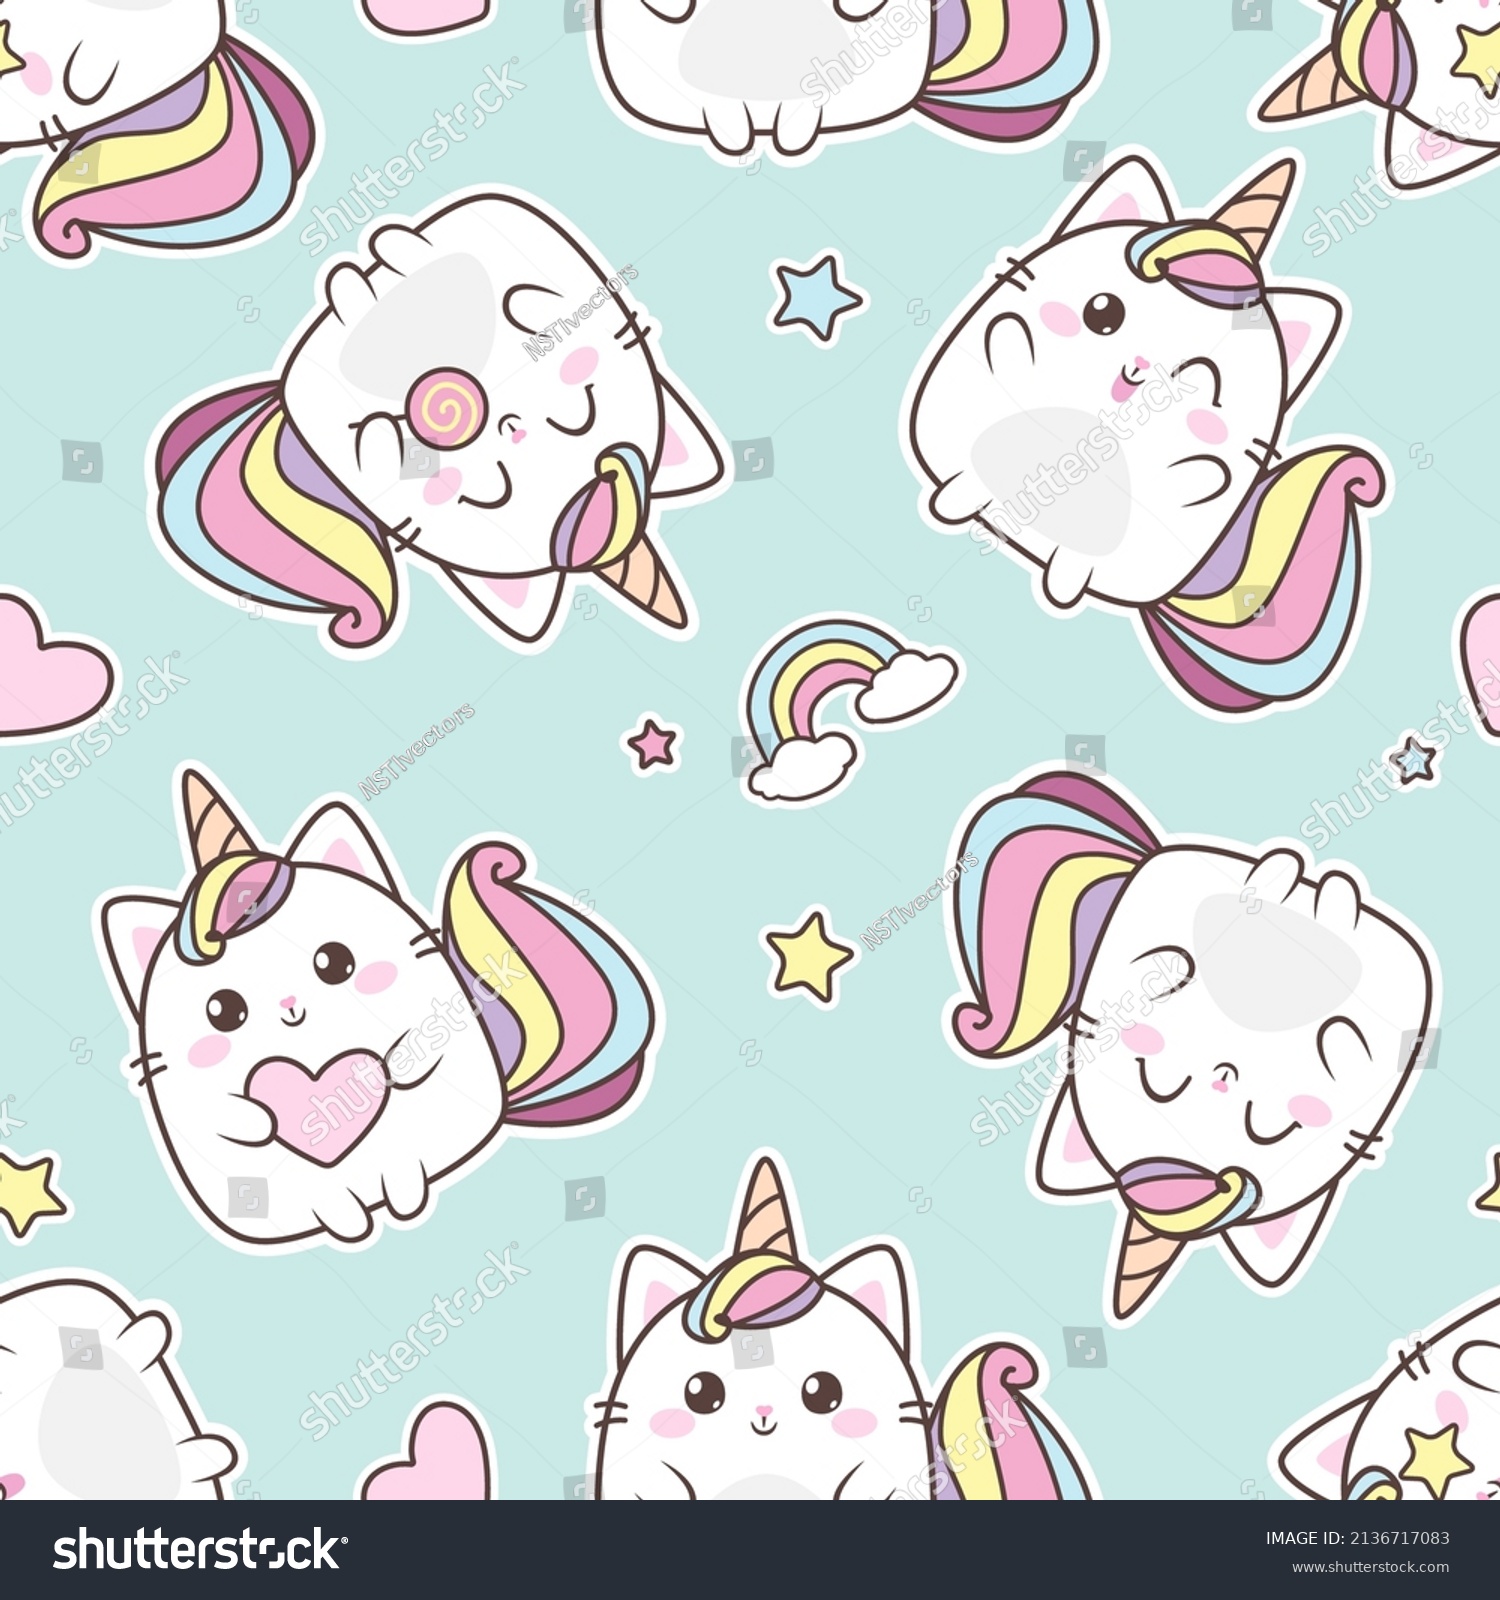 SVG of Cute Cat Caticorn or Kitten Unicorn vector seamless pattern. Kawaii Cat Unicorn with lollipop. Isolated vector illustration for kids design prints, posters, t-shirts, stickers svg